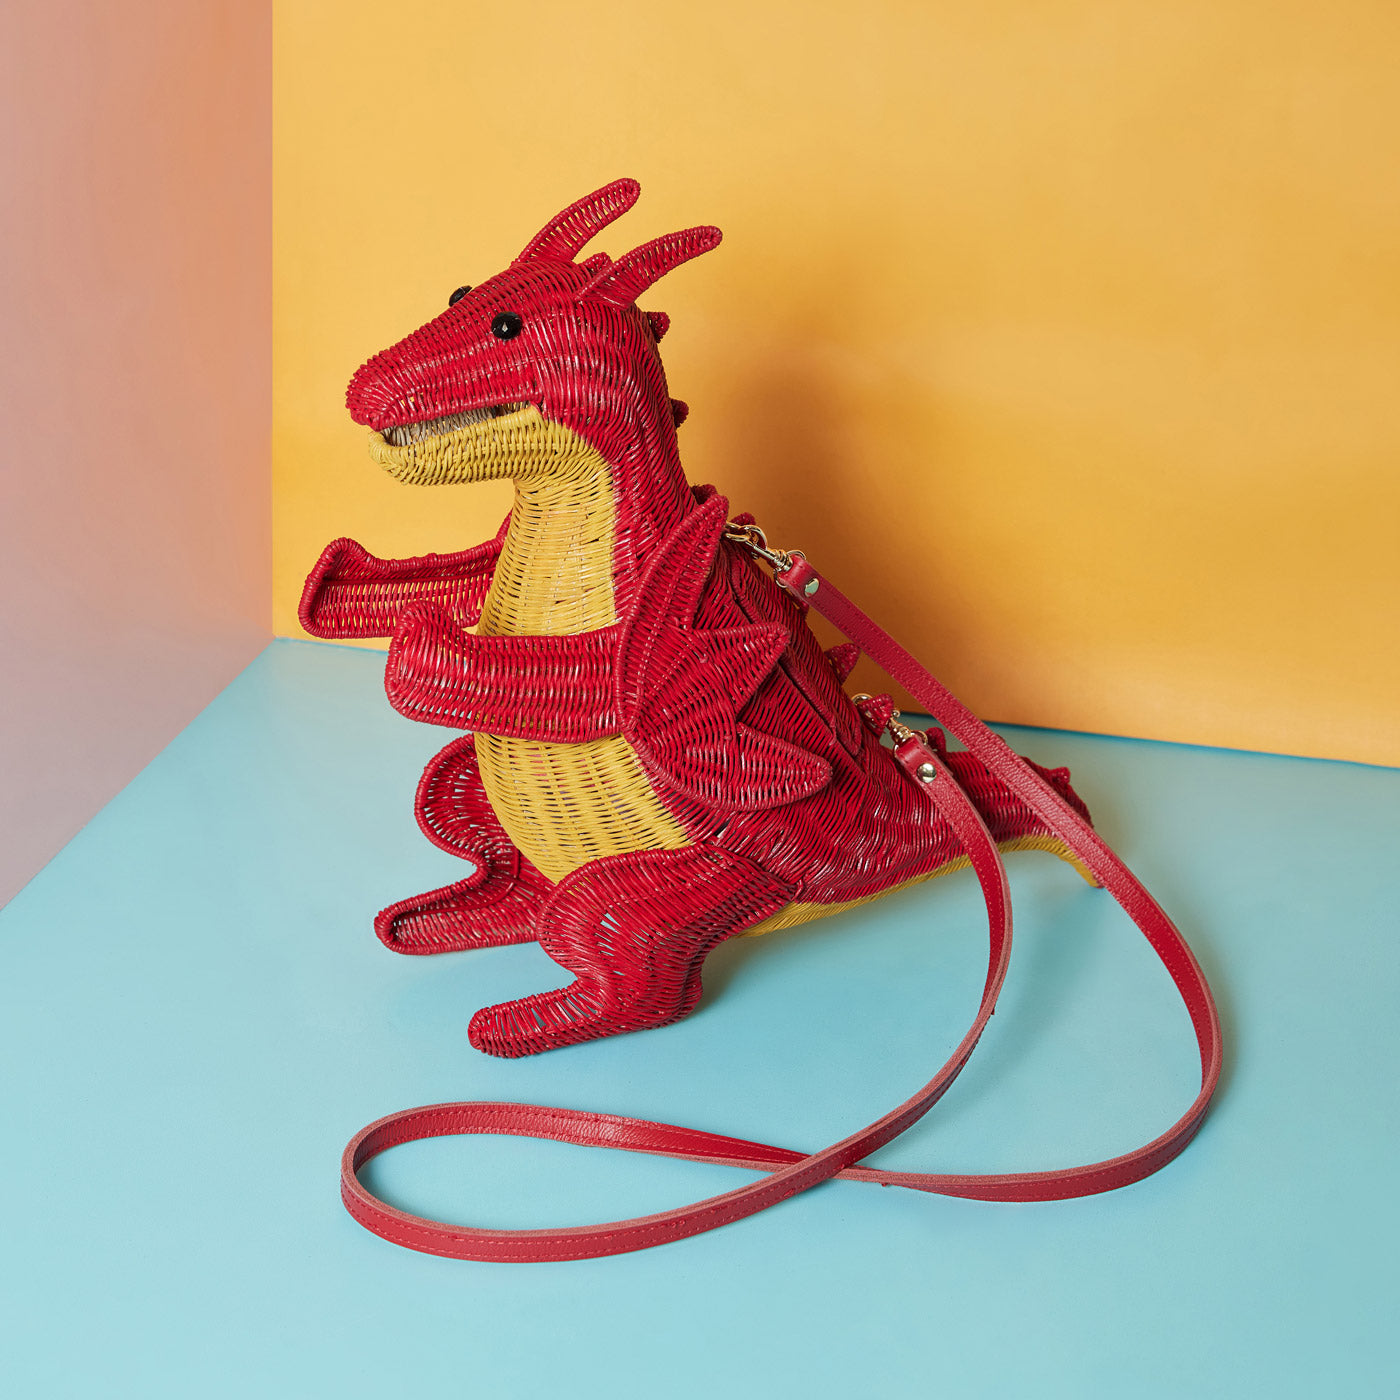 Wicker Darling's Rhys the Red dragon purse on a colourful background